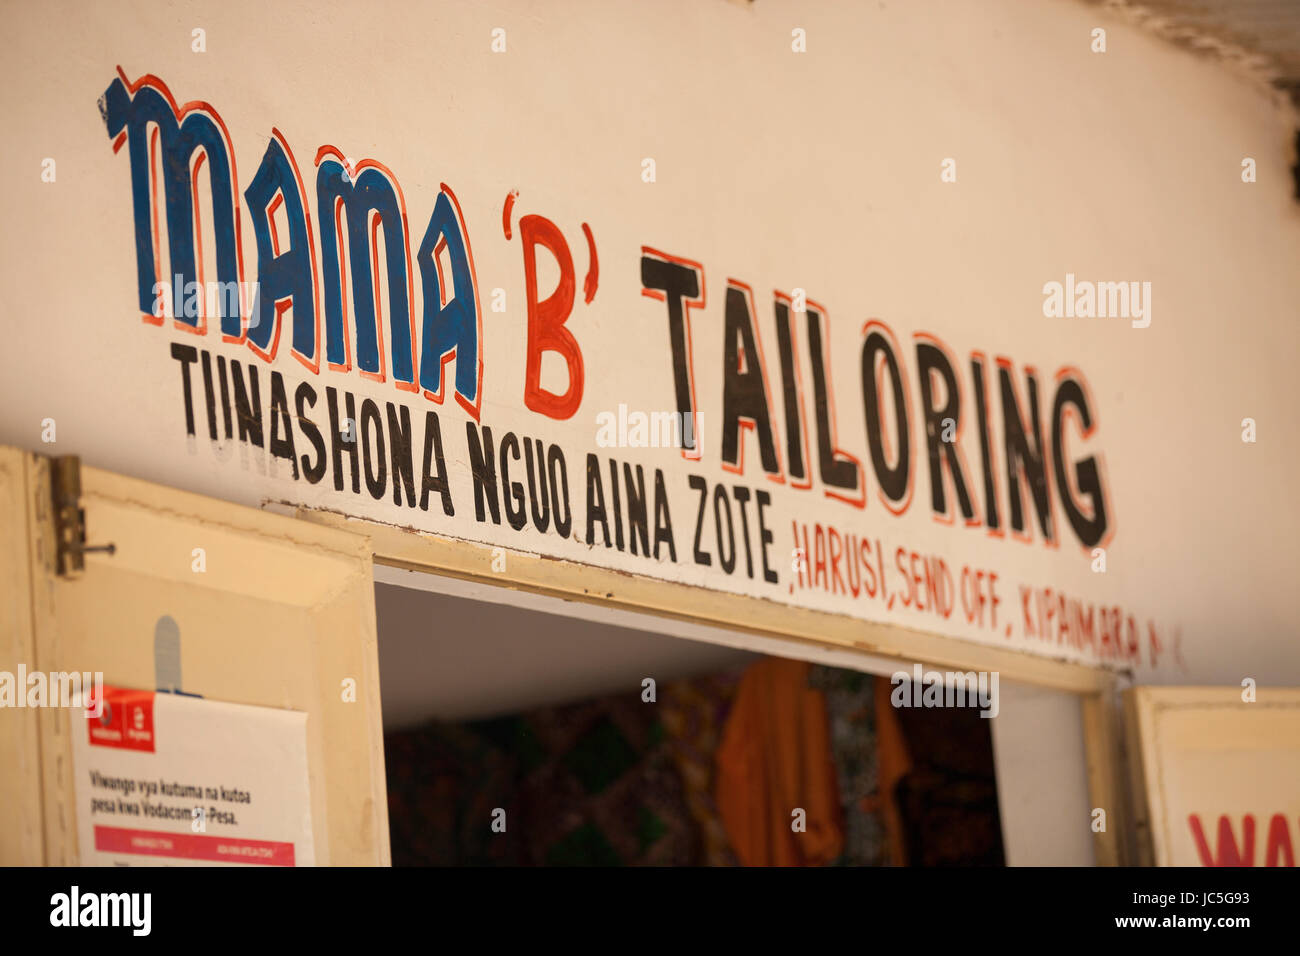 The shop front sign to a female tailor's shop, Tanzania, Africa Stock Photo